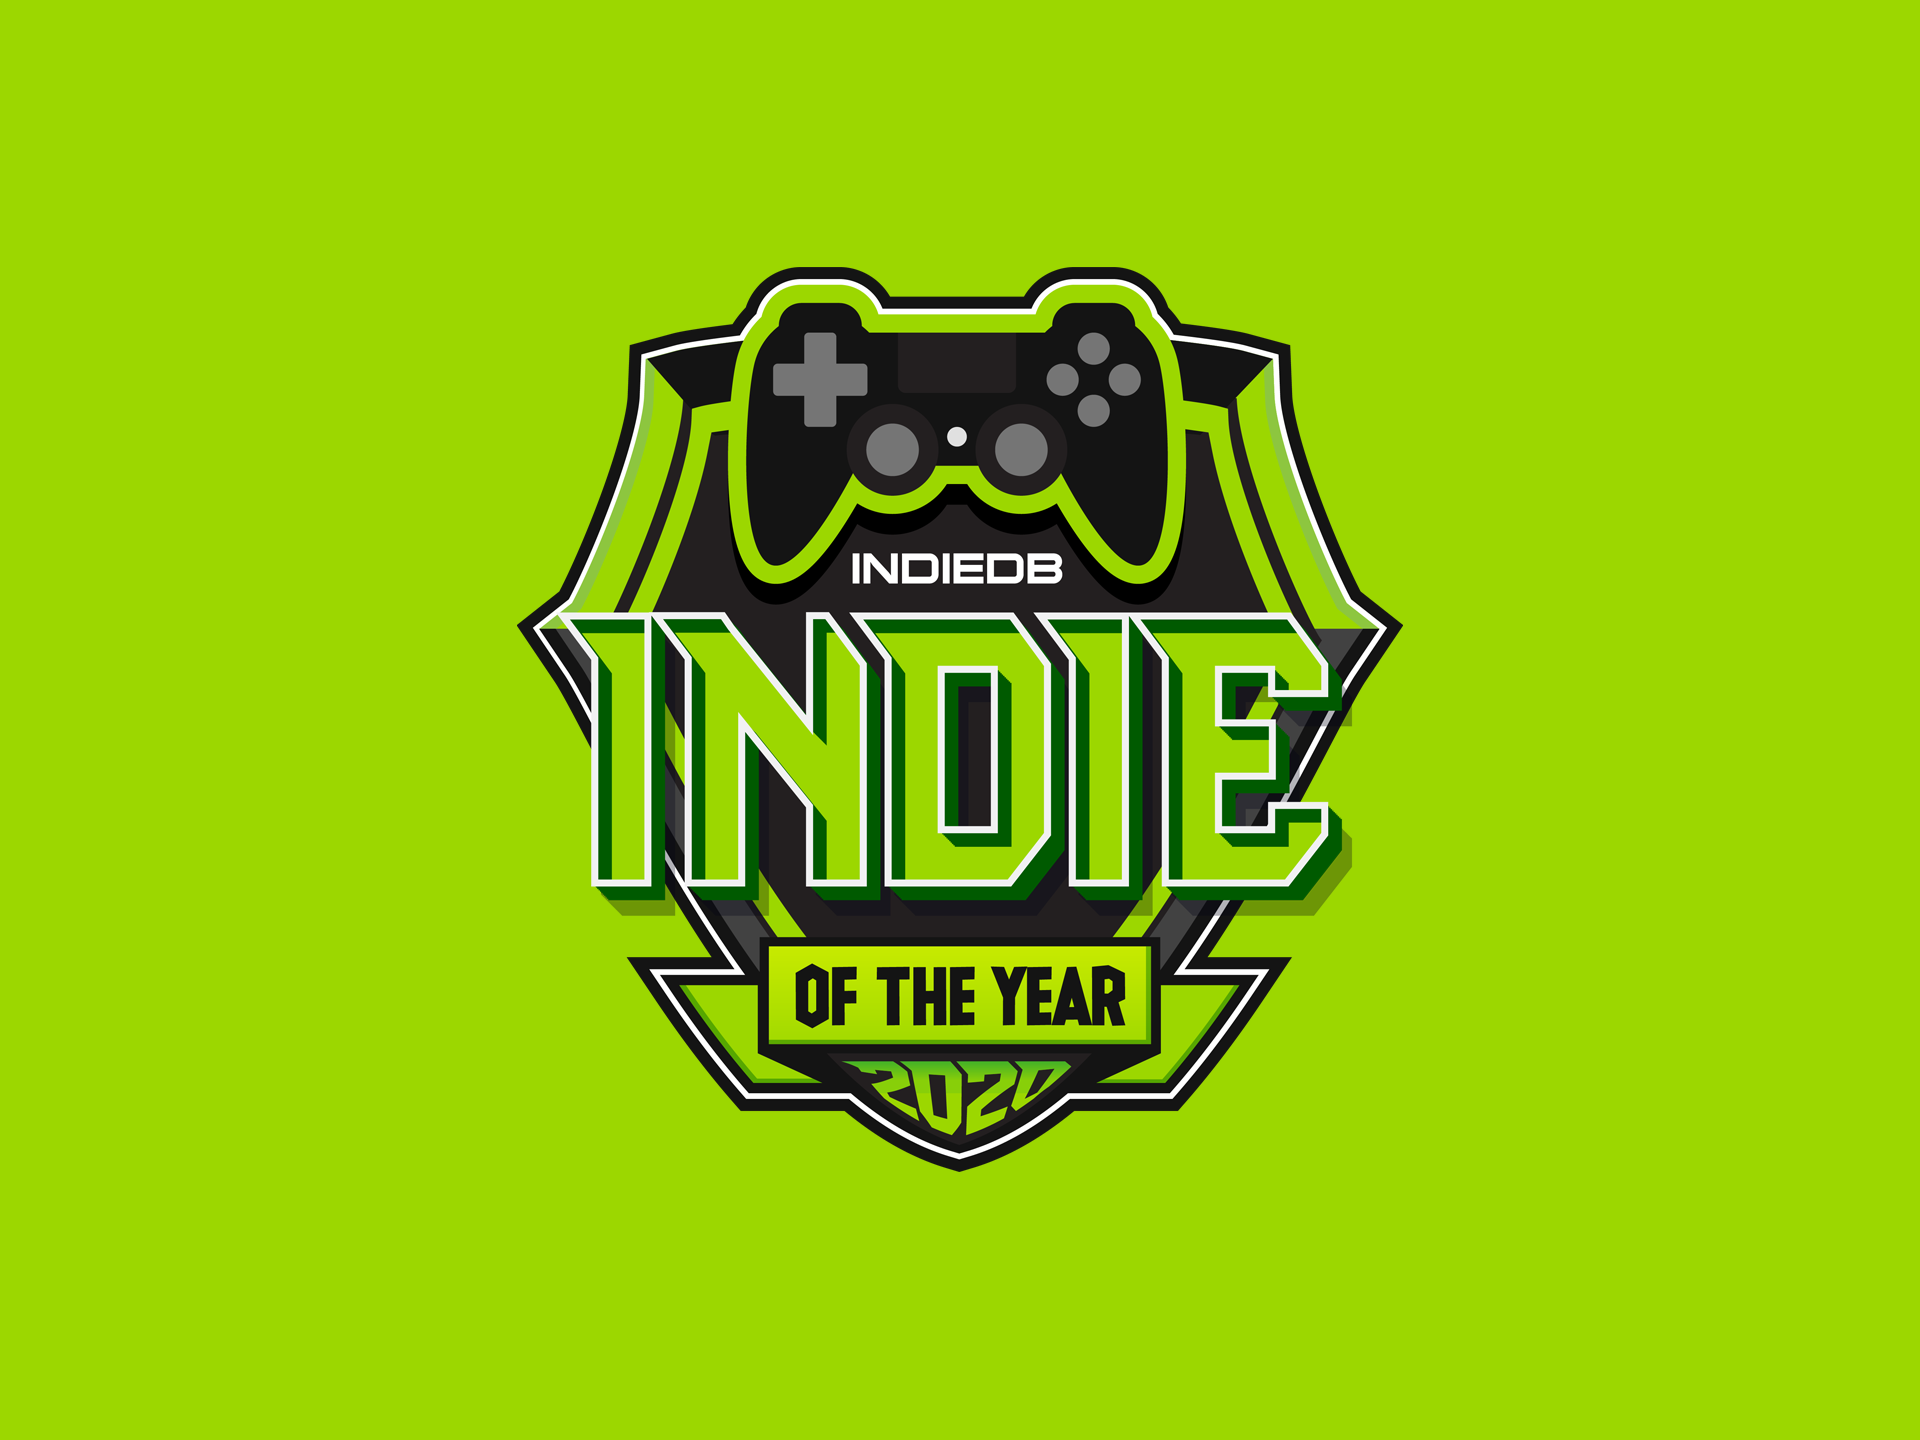 Global Game Awards 2020 Results: Game of the Year - Best Indie